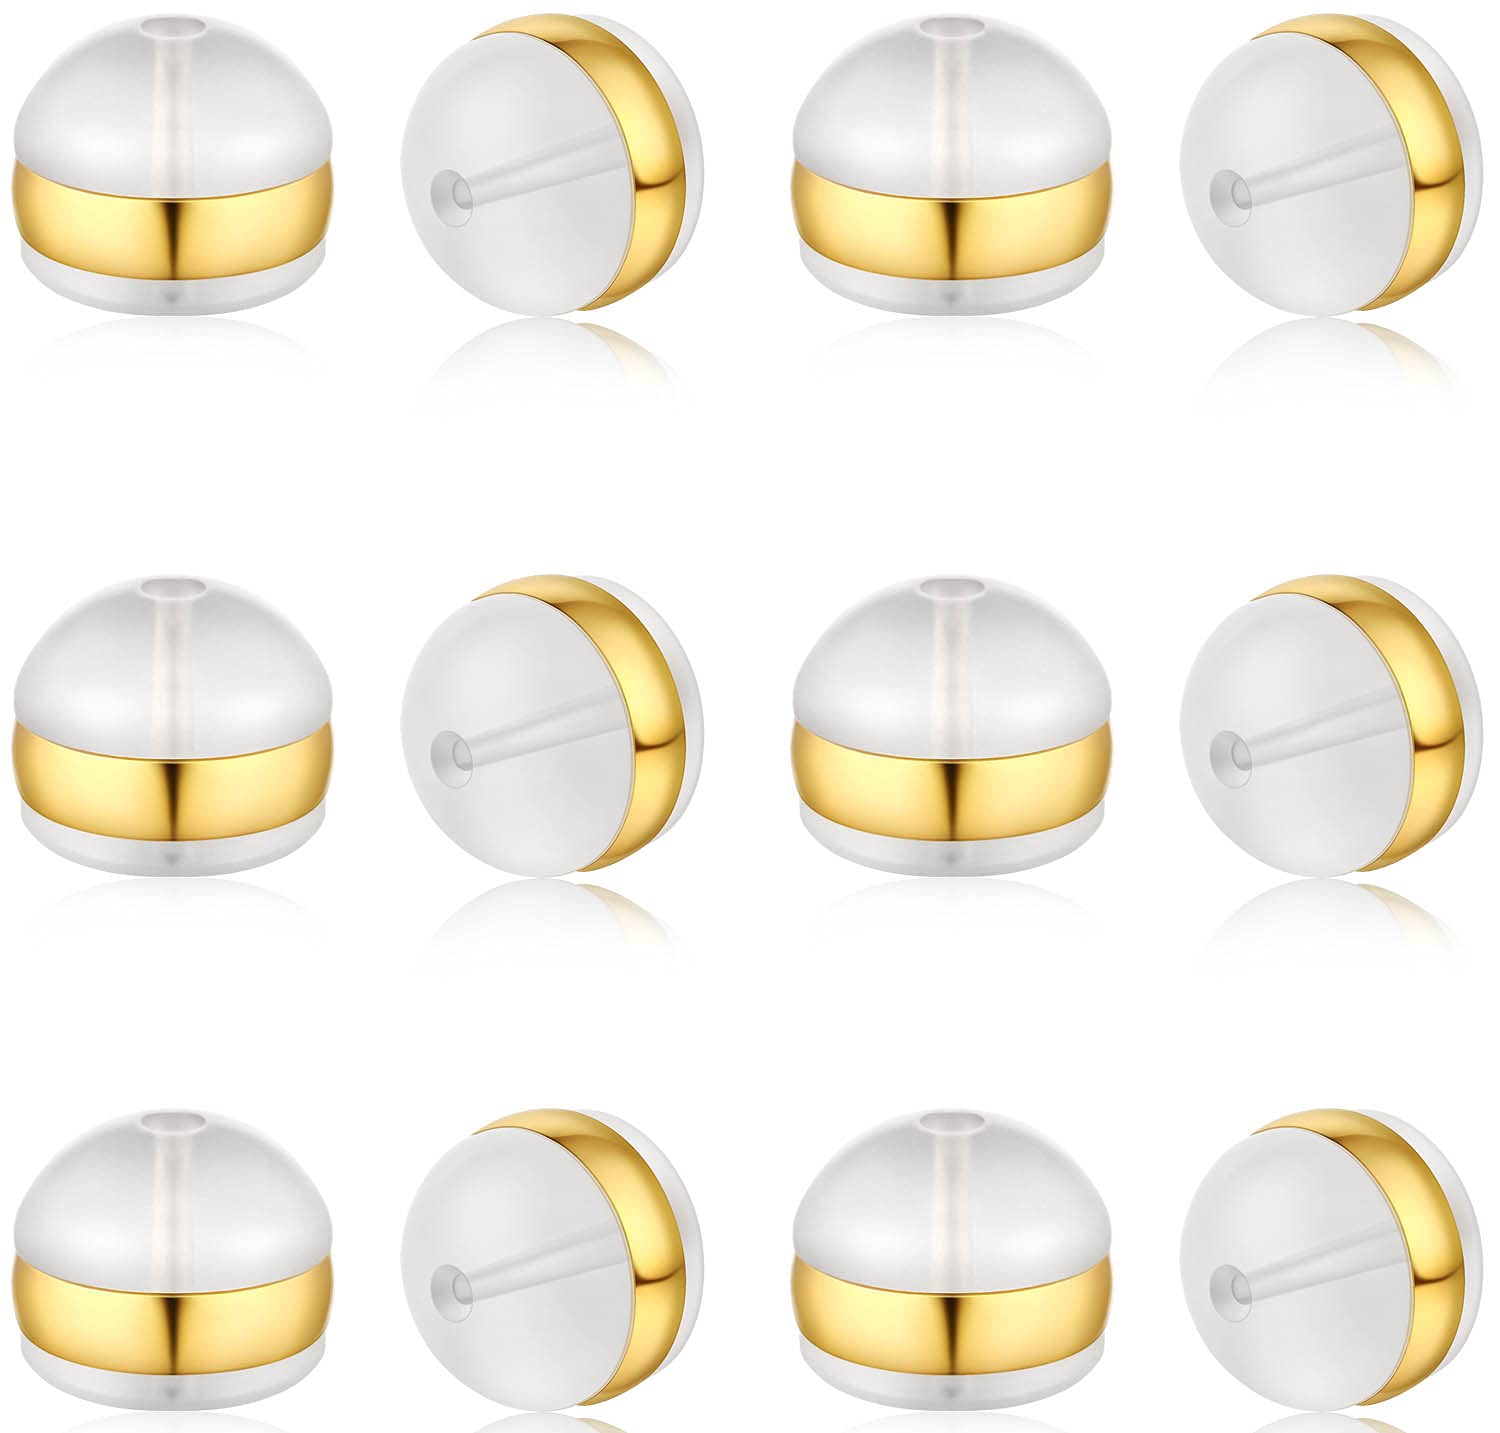 DELECOE 12pcs Gold Soft Silicone Earring Backs for Studs Gold Belt